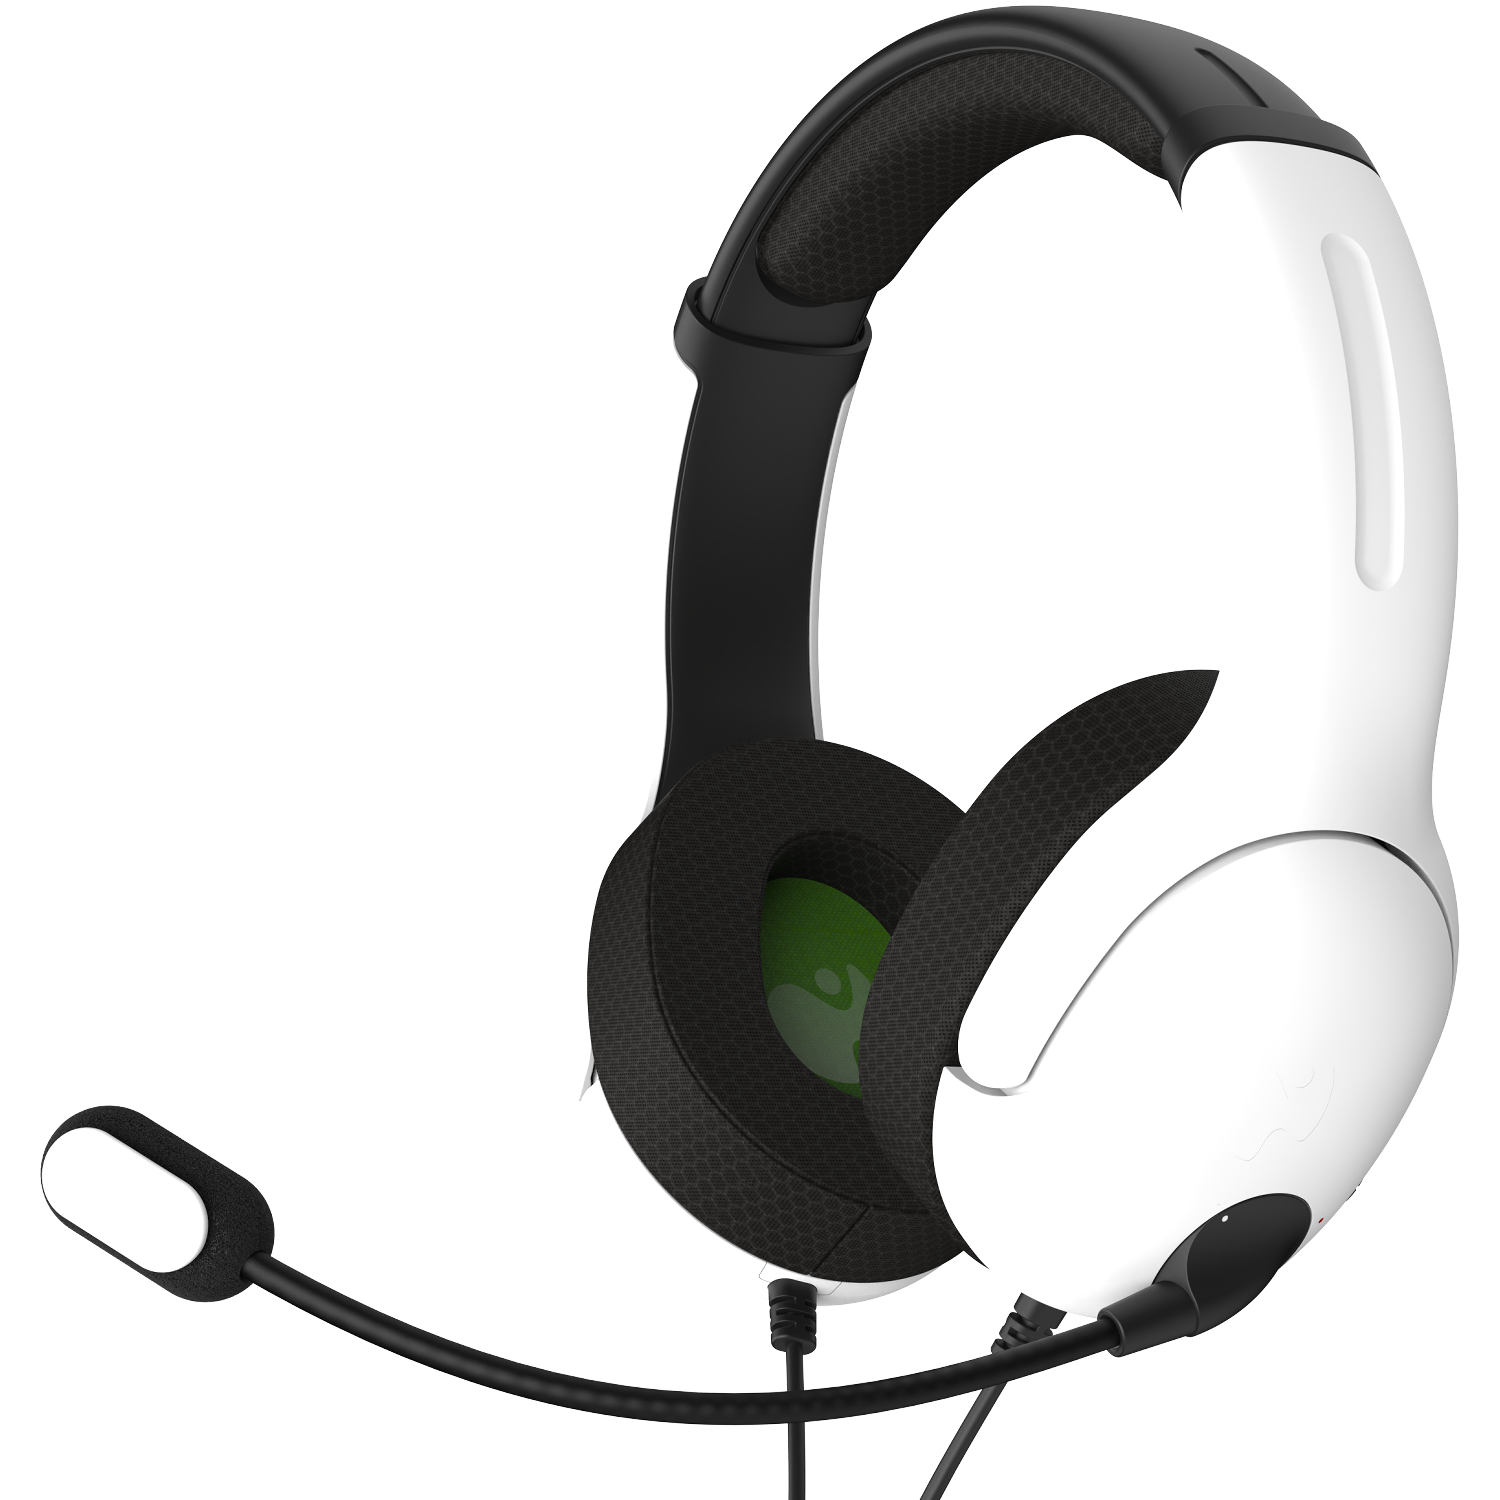 Wired Stereo Headset